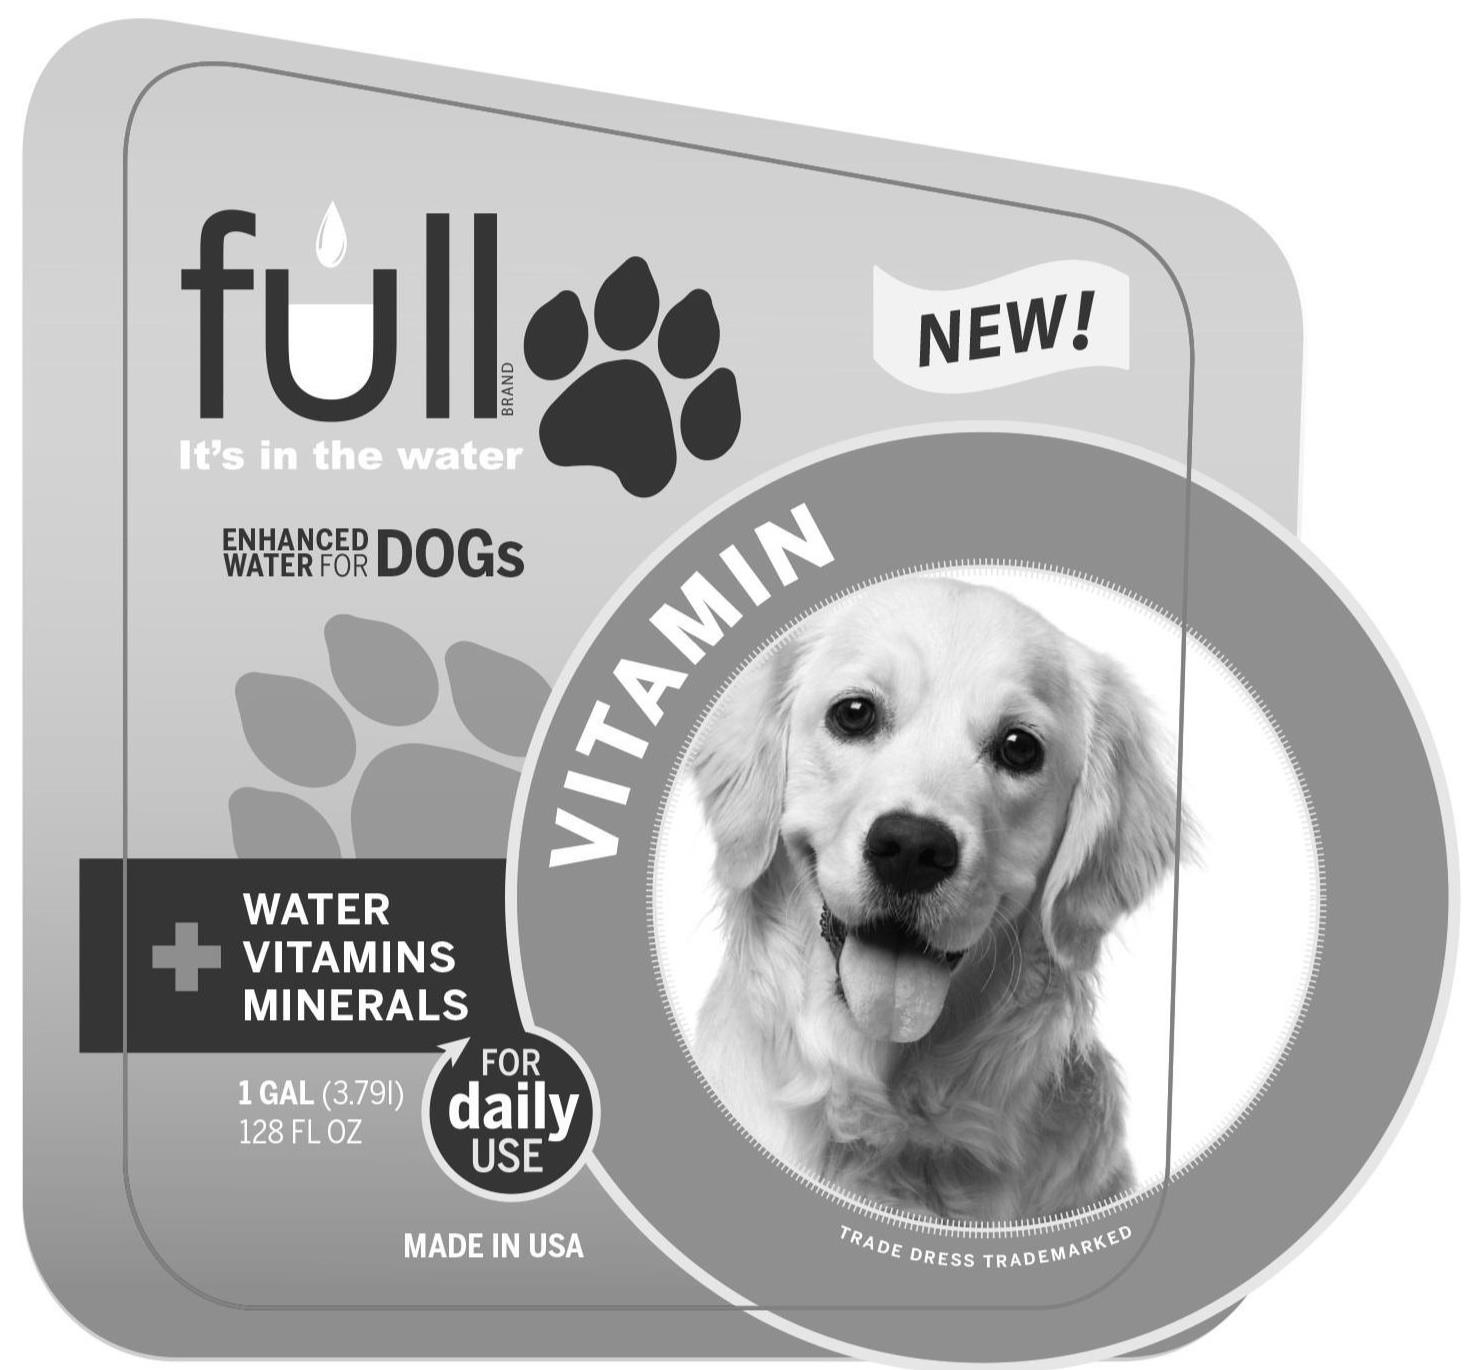  FULL BRAND IT'S IN THE WATER NEW! ENHANCED WATER FOR DOGS VITAMIN + WATER VITAMINS MINERALS 1 GAL (3.79L) 128 FL OZ FOR DAILY USE MADE IN USA TRADE DRESS TRADEMARKED